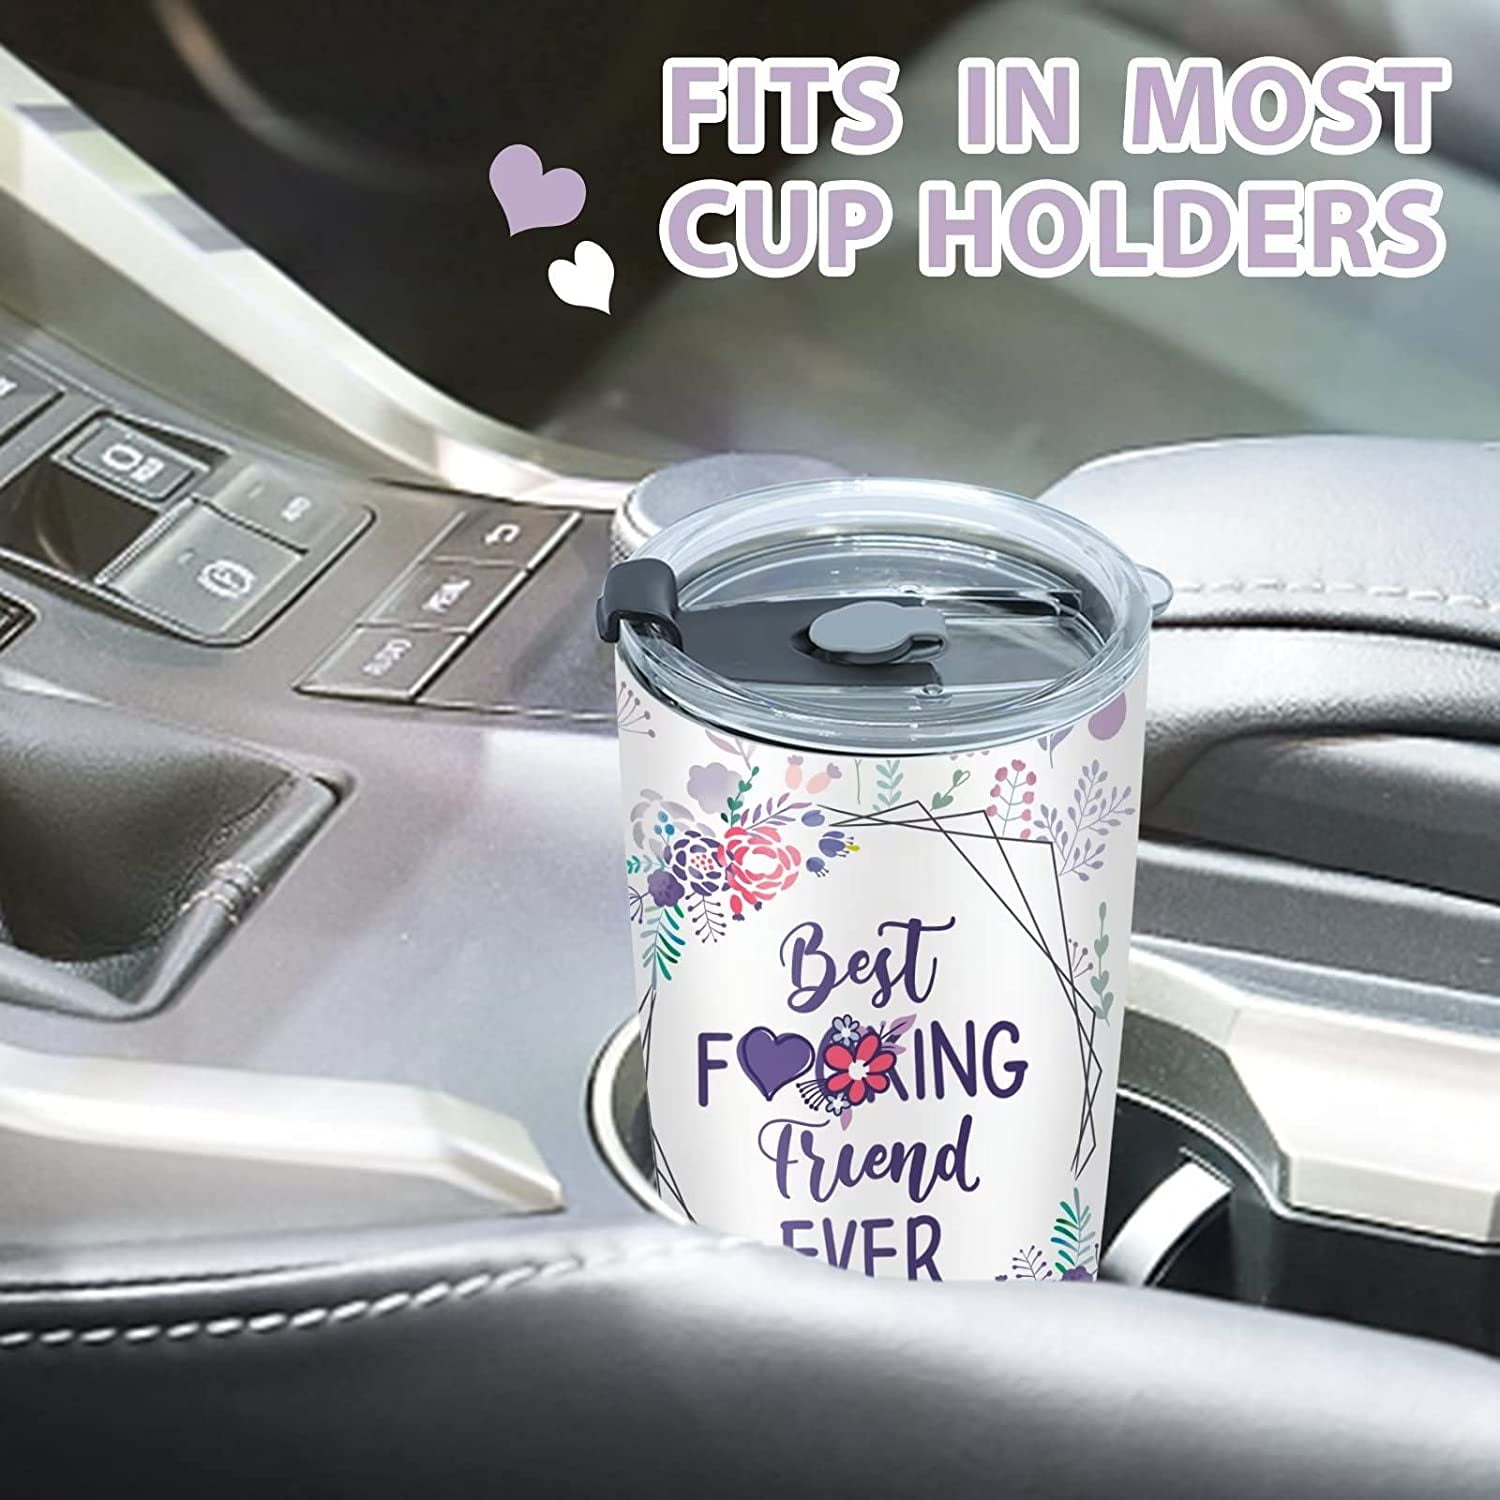 The Best Glass Tumbler Ever - Pink Dolls - In Our Bestie Era (D1) - Gift  For Best Friends, BFF, Sisters, Coworkers